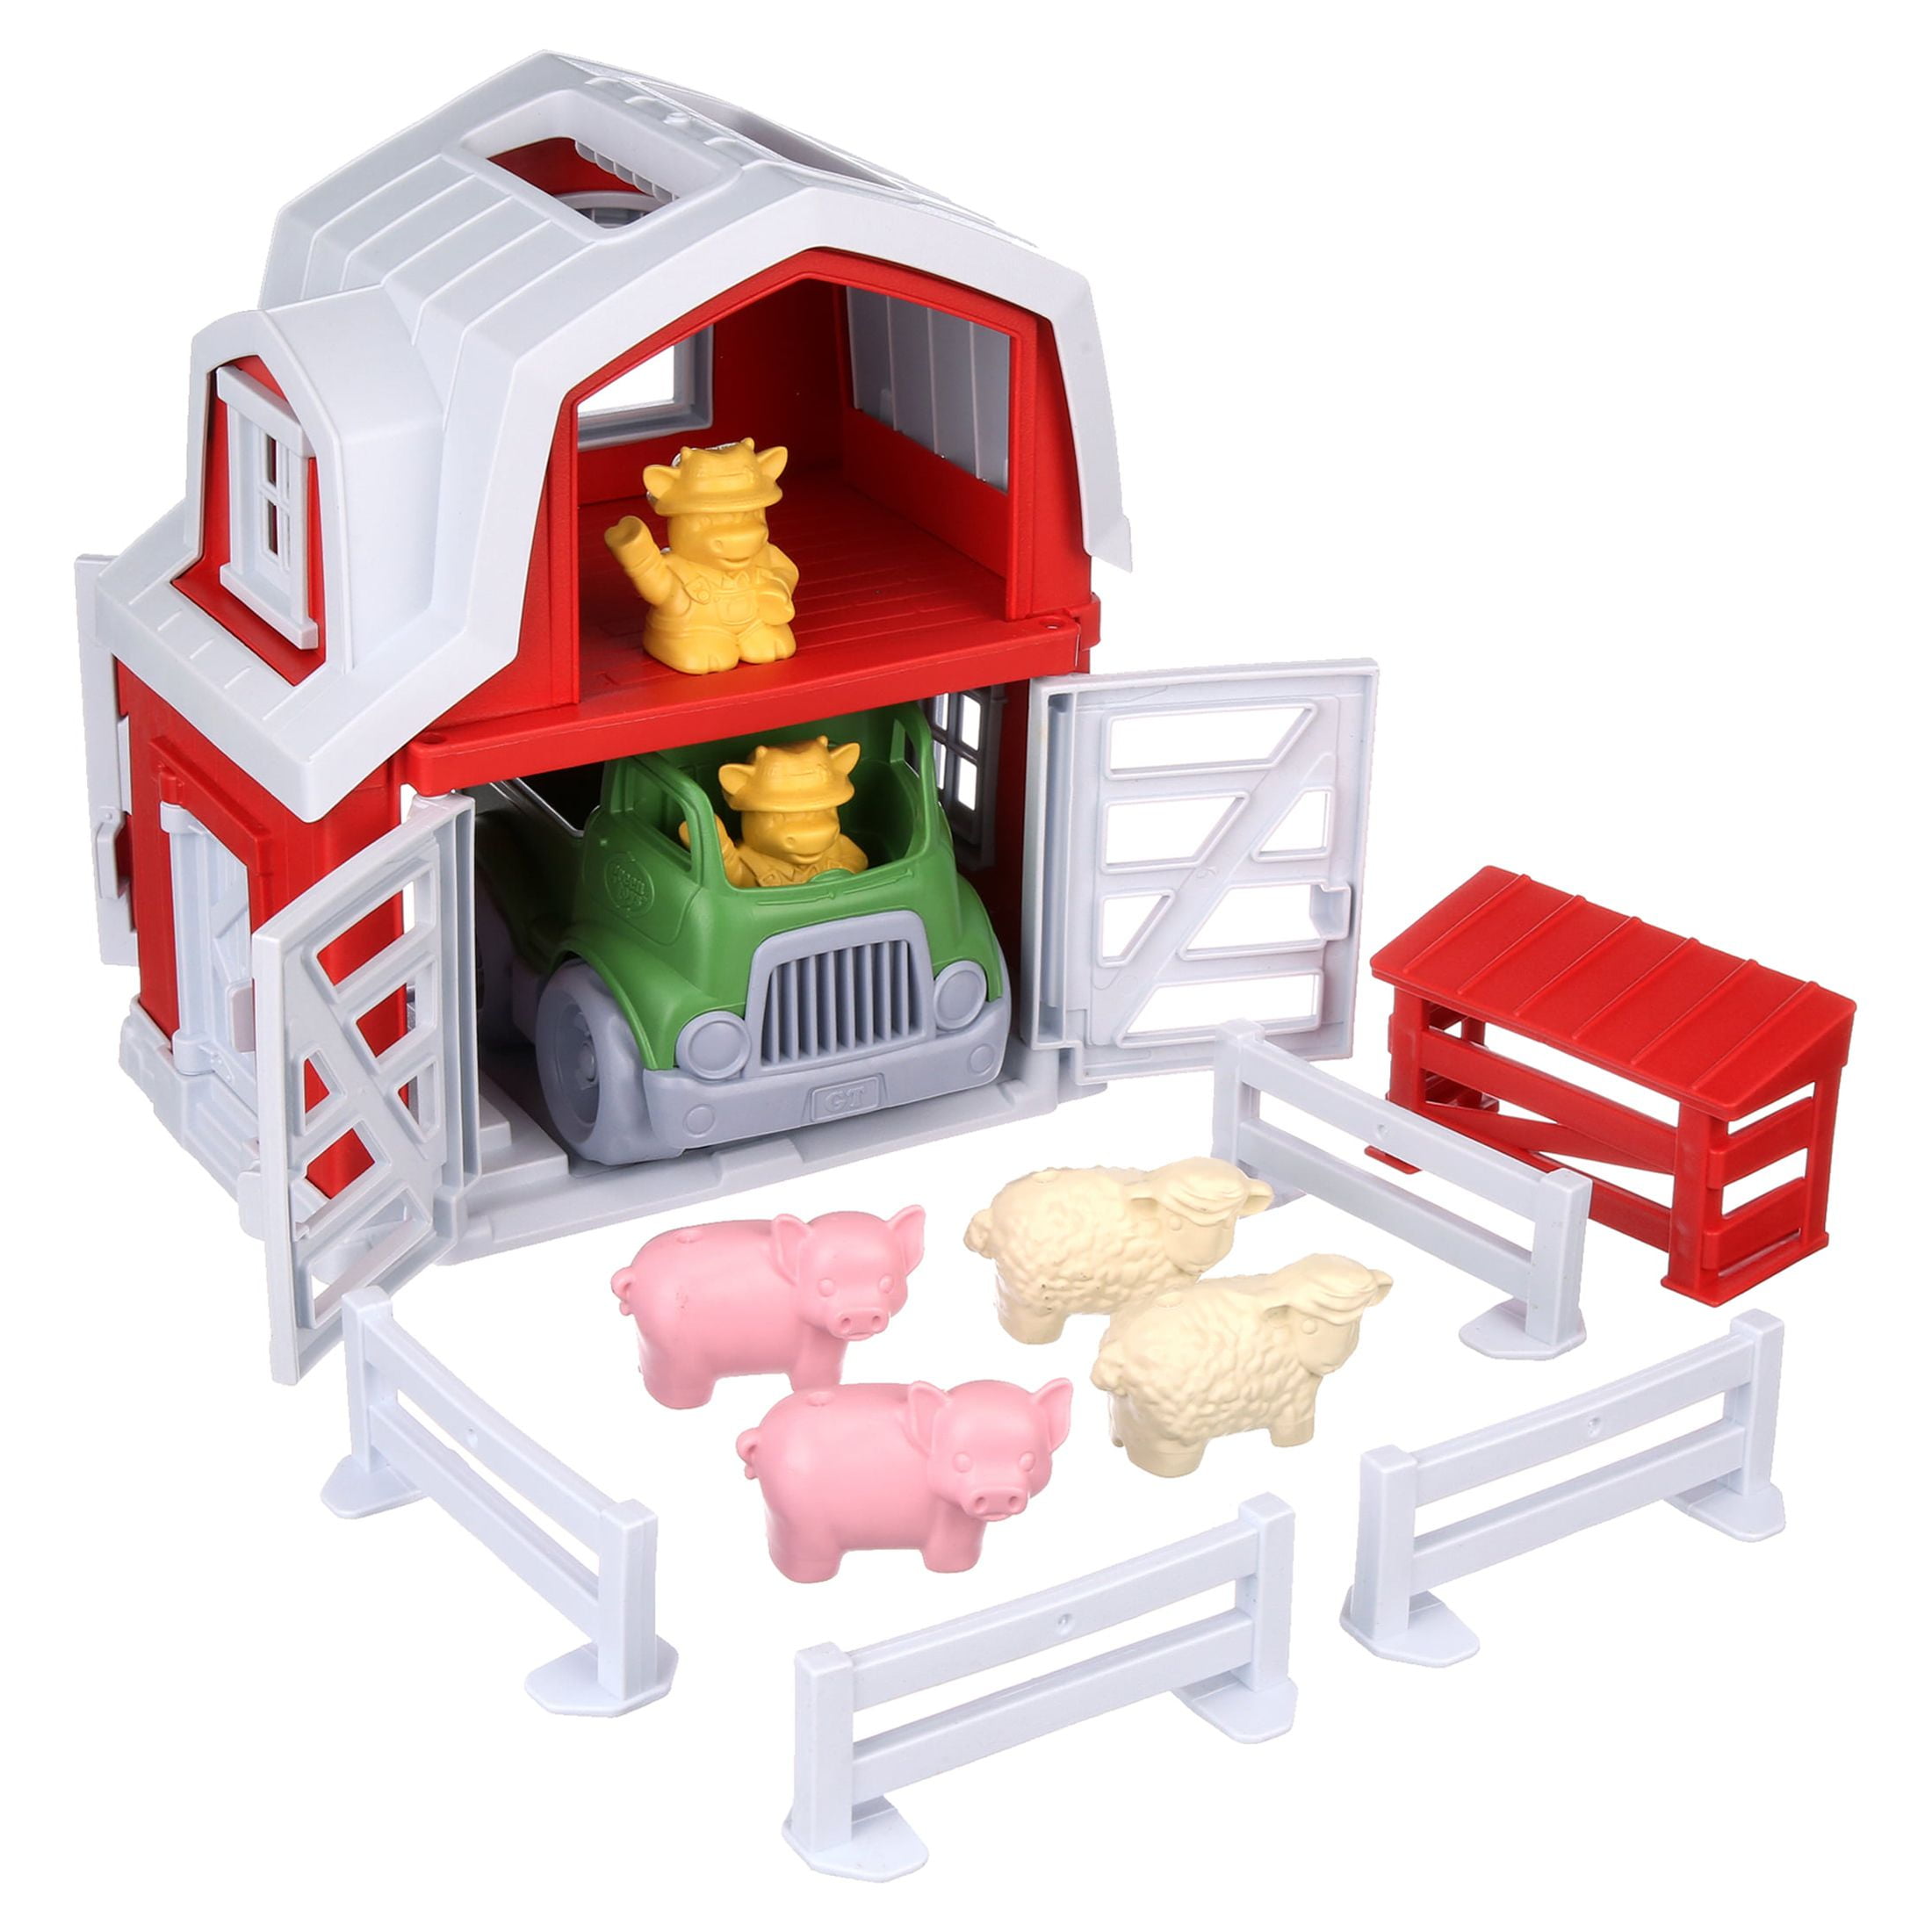 Buy wholesale Farm set, assortment of 2 themes - From 3 years old